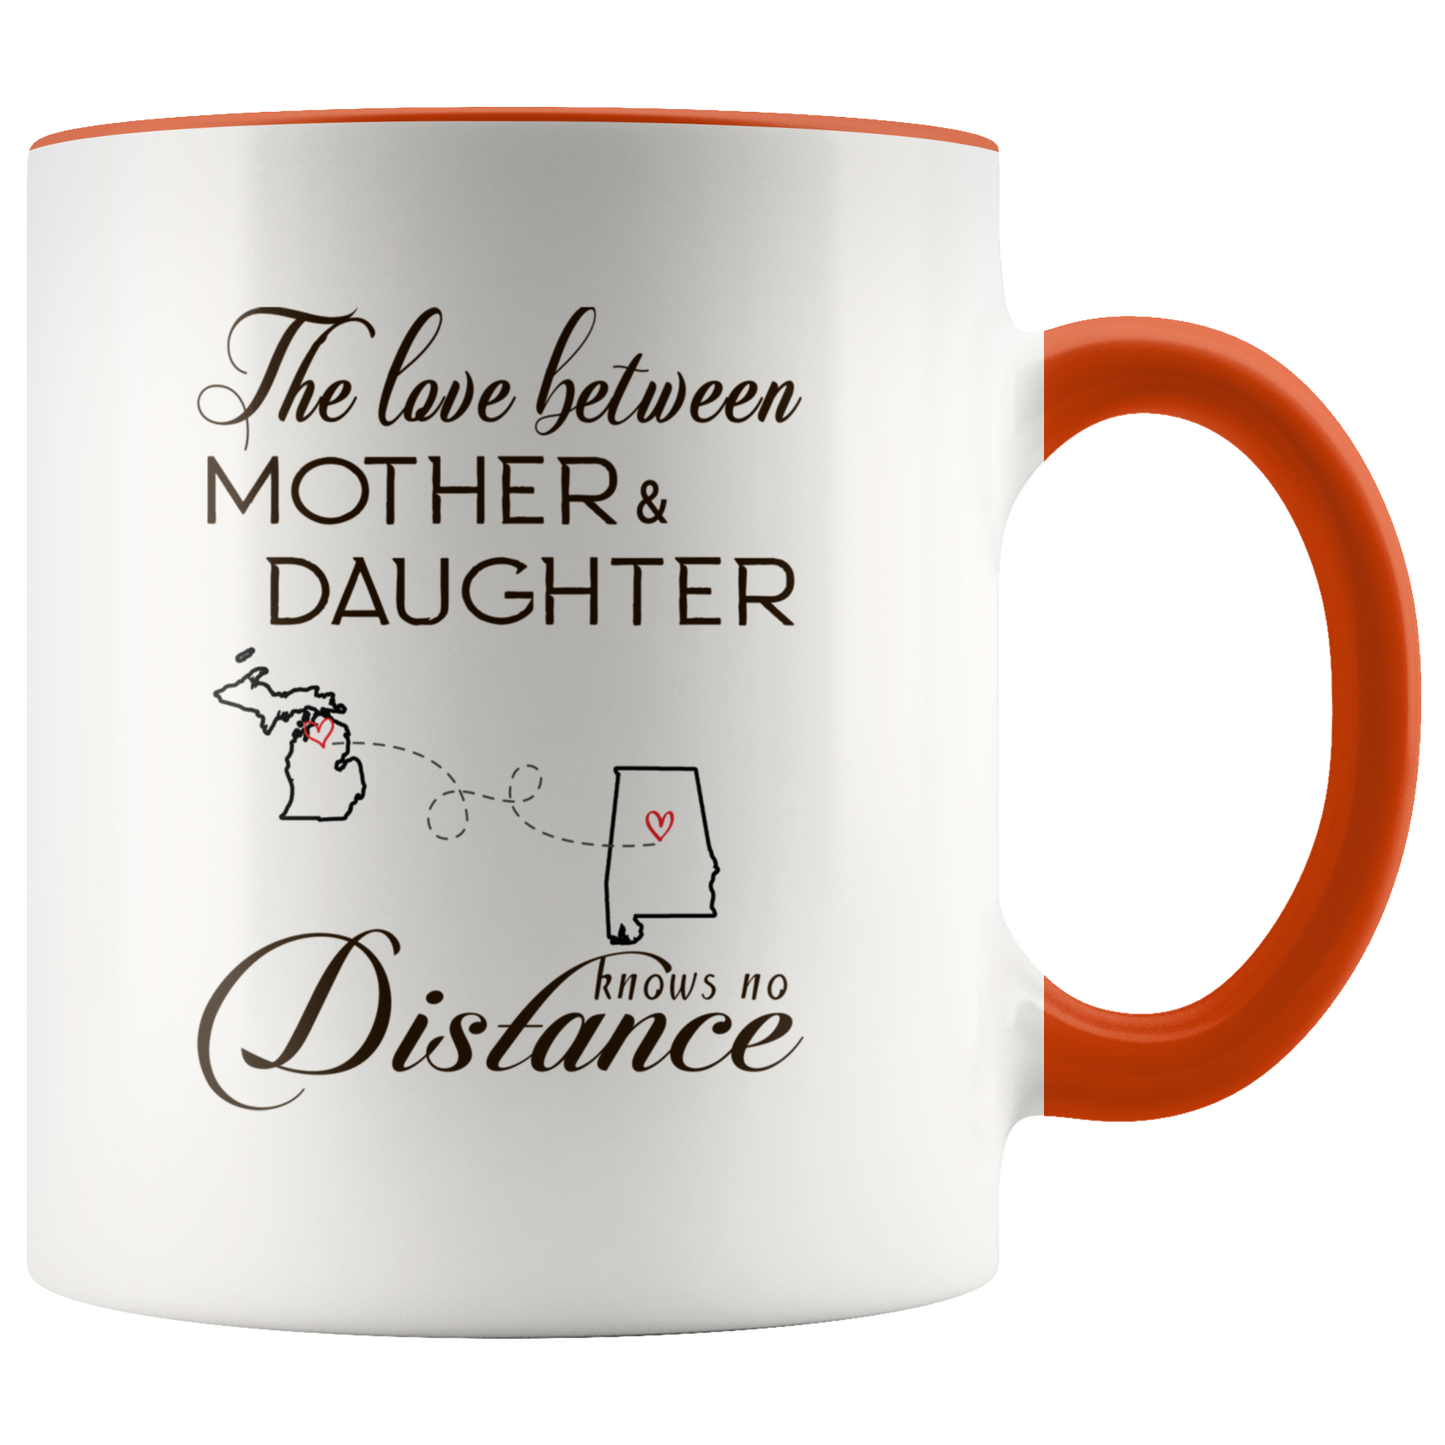 ND-21334603-sp-23848 - [ Michigan | Alabama ]Long Distance Accent Mug 11 oz Red - The Love Between Mother